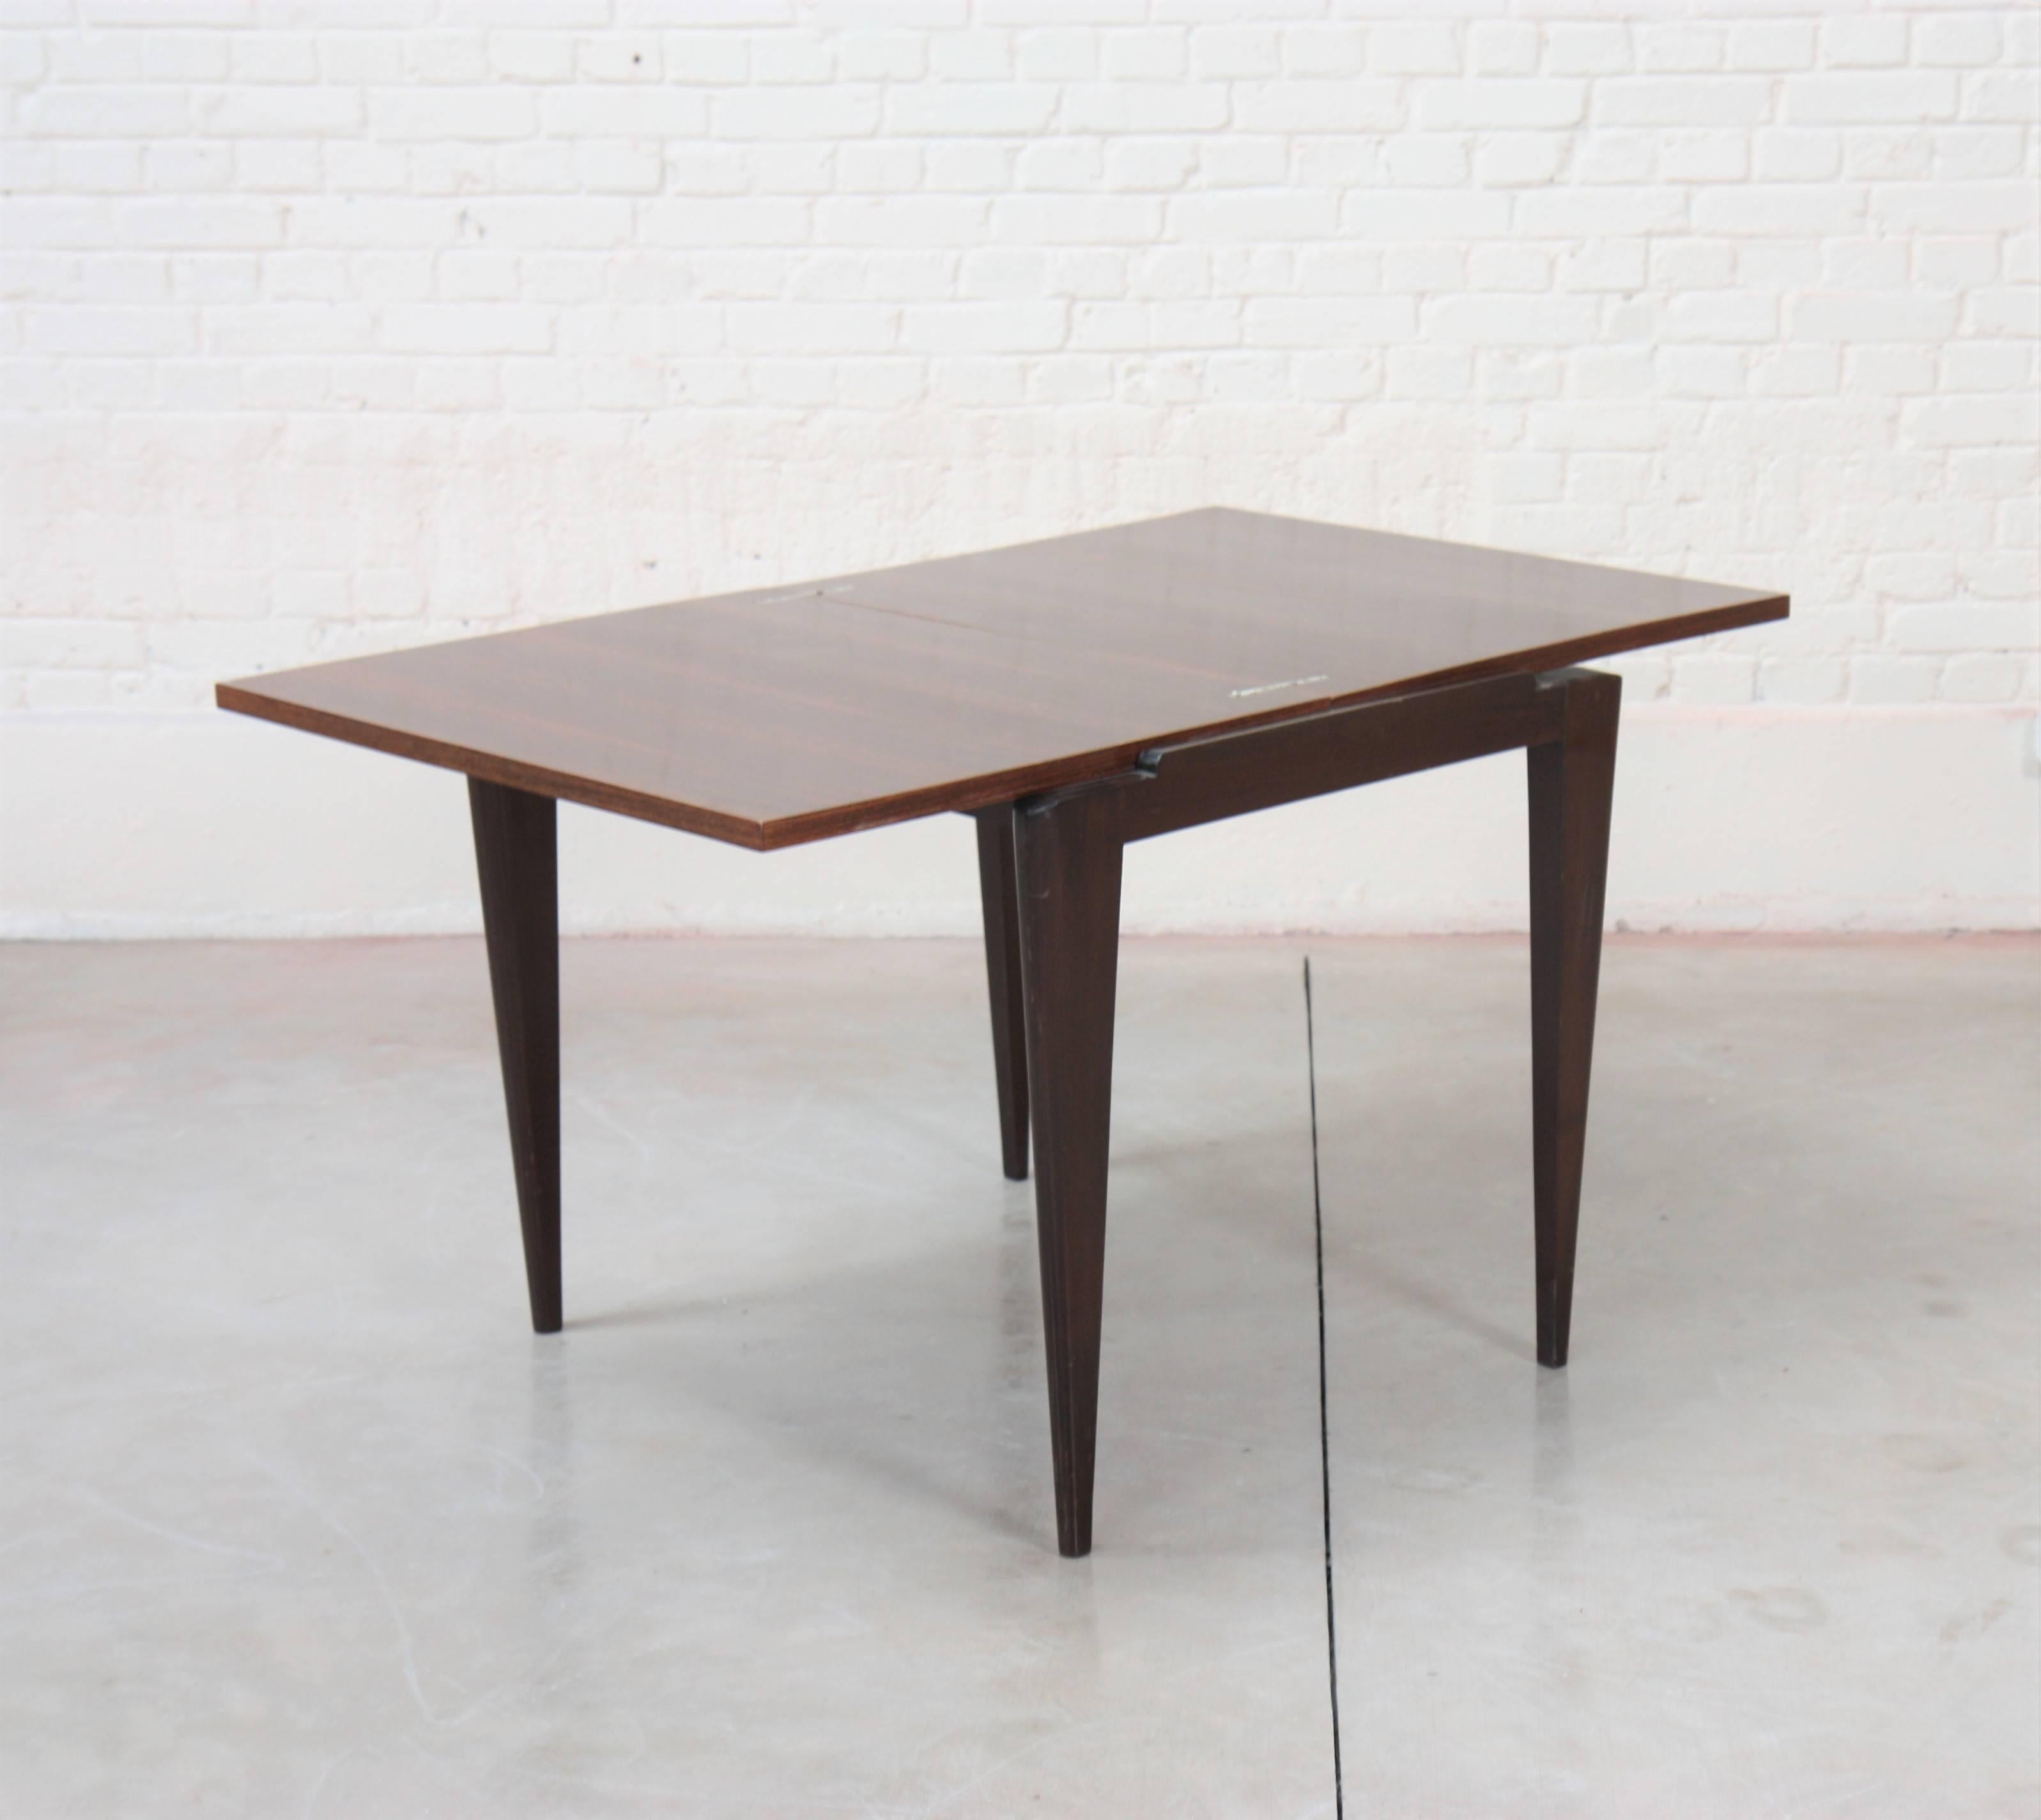 Rectangular table with folding tray in rosewood resting on four tapered legs.

Maurice Jallot (1900-1971) is the son of Léon Jallot. Like his father Léon, Maurice is a wood carver, cabinet maker and decorator. After graduating from the Ecole Boule